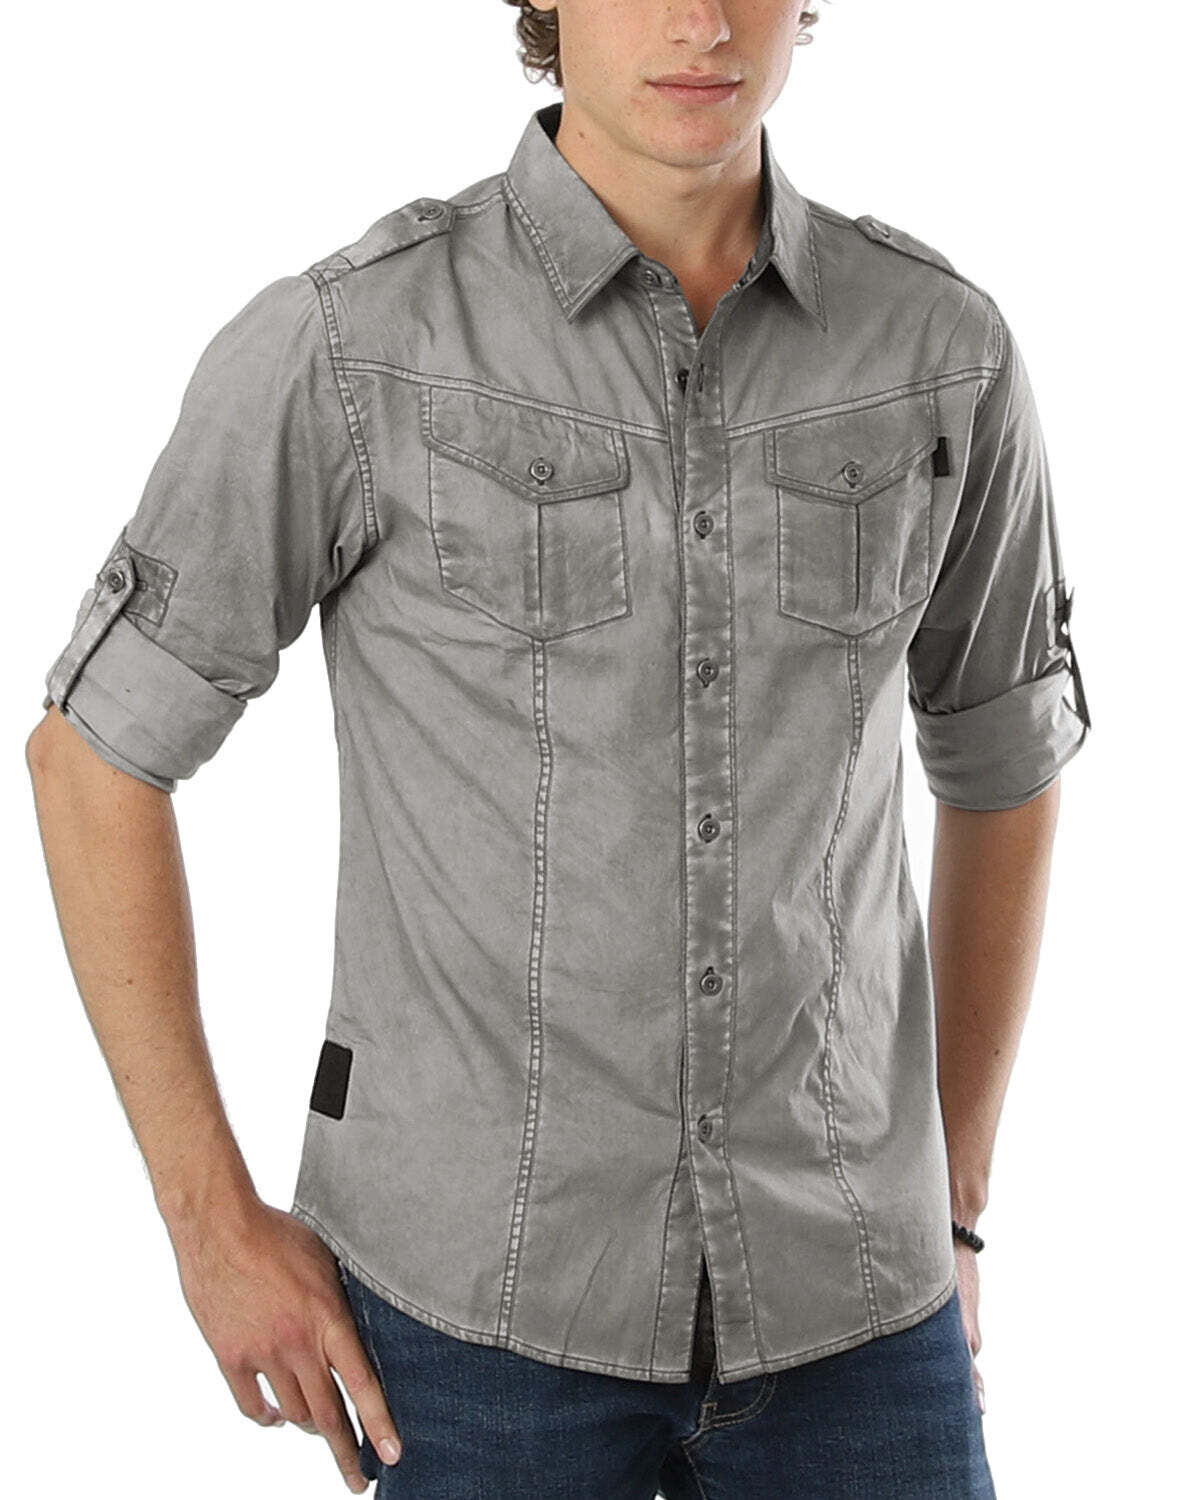 ZIMEGO Men's Stretch Roll-Up Sleeve Color Washed Vintage Rugged Fashion Button Shirts